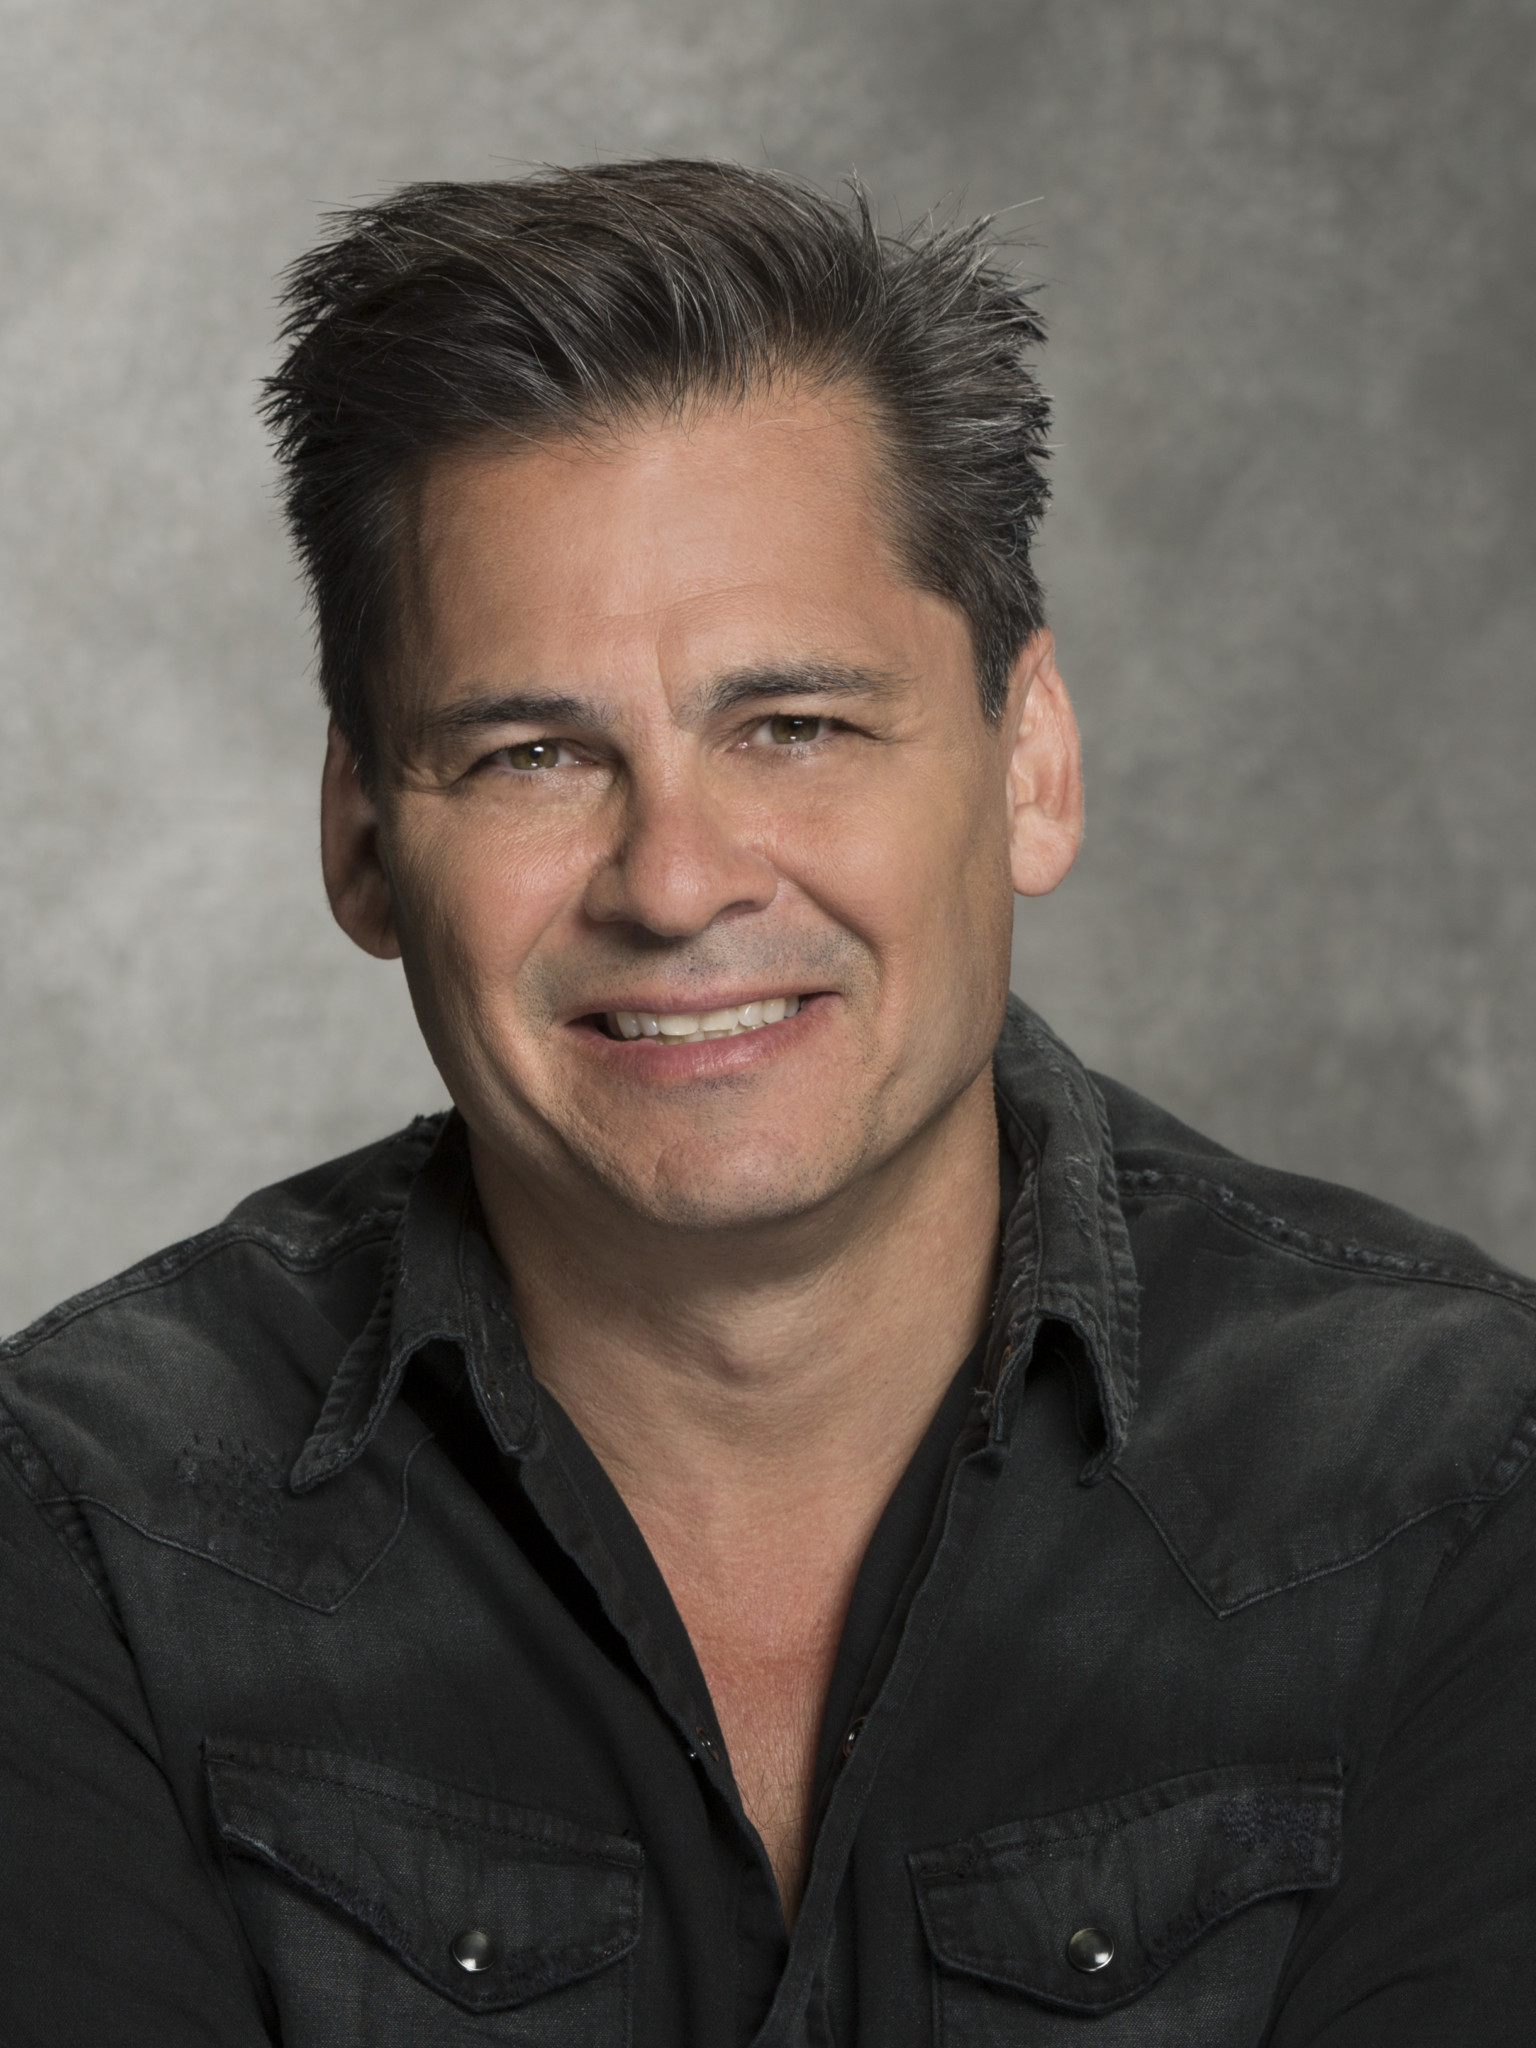 Peter Lenkov, Executive Producer of the CBS series MACGYVER, scheduled to air on the CBS Television Network. Photo: Cliff Lipson/CBS ©2016 CBS Broadcasting, Inc. All Rights Reserved